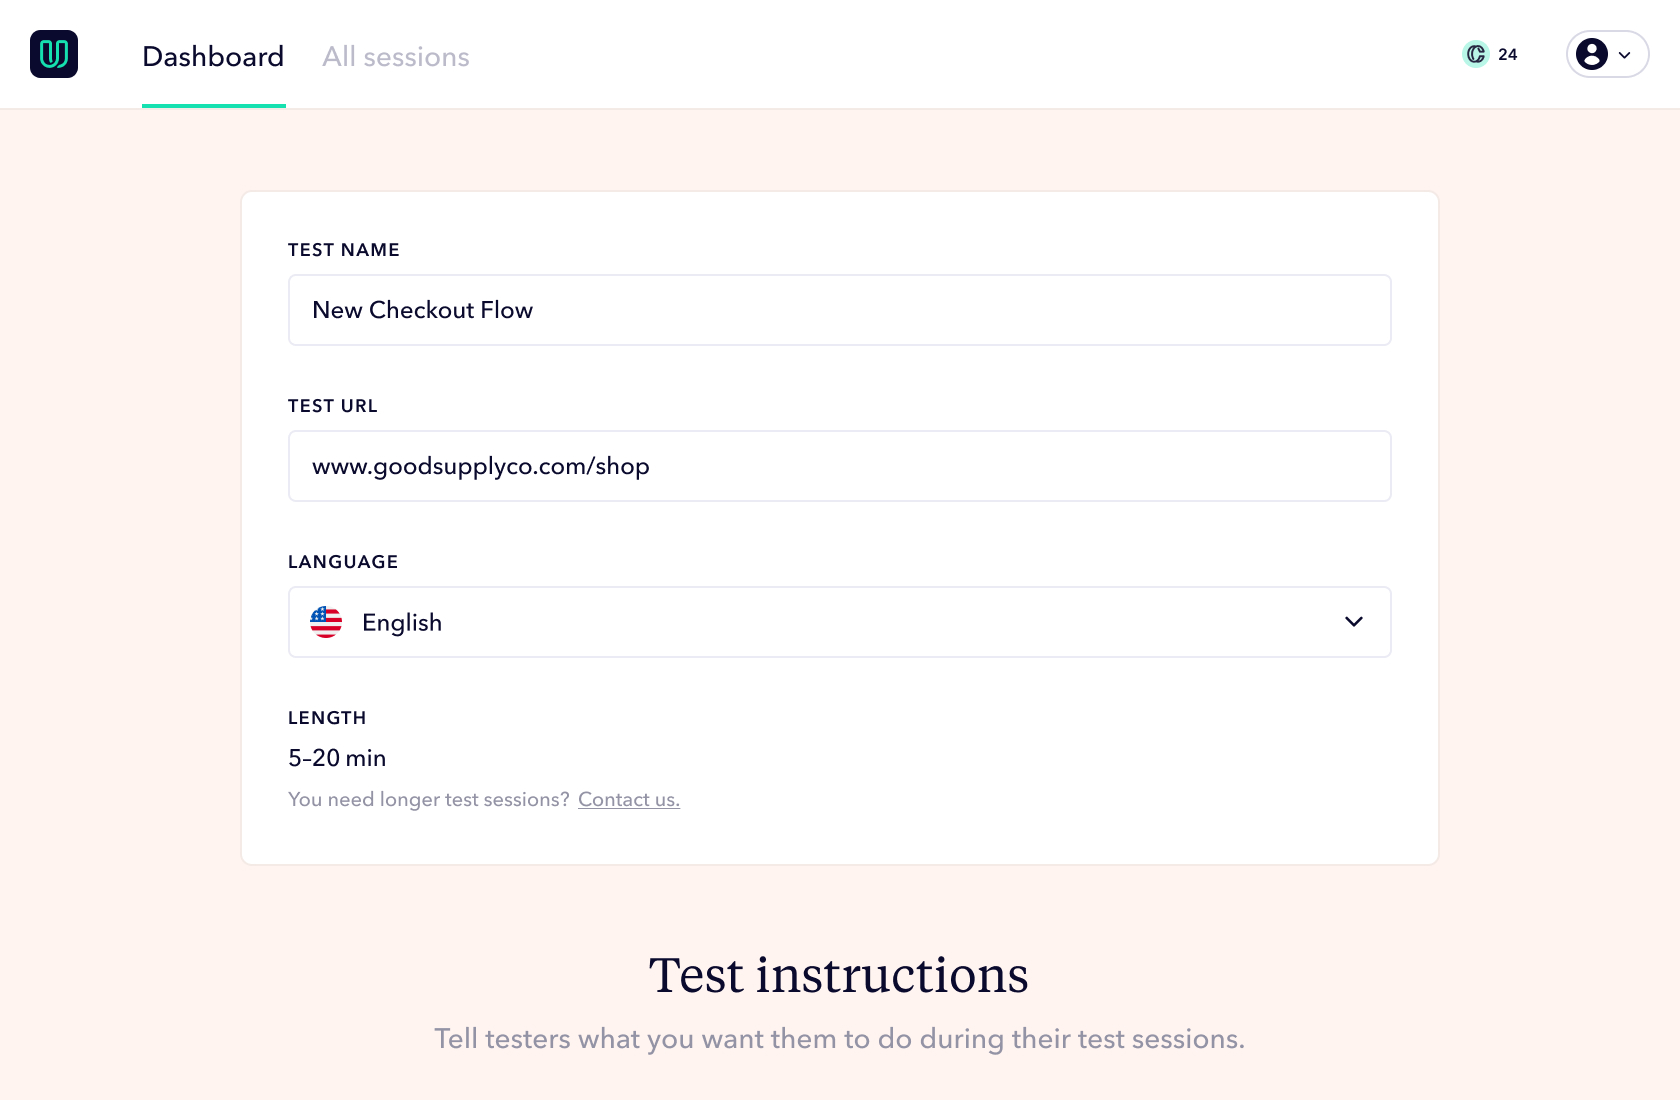 Testing with your own users first step: Set test name, url and language